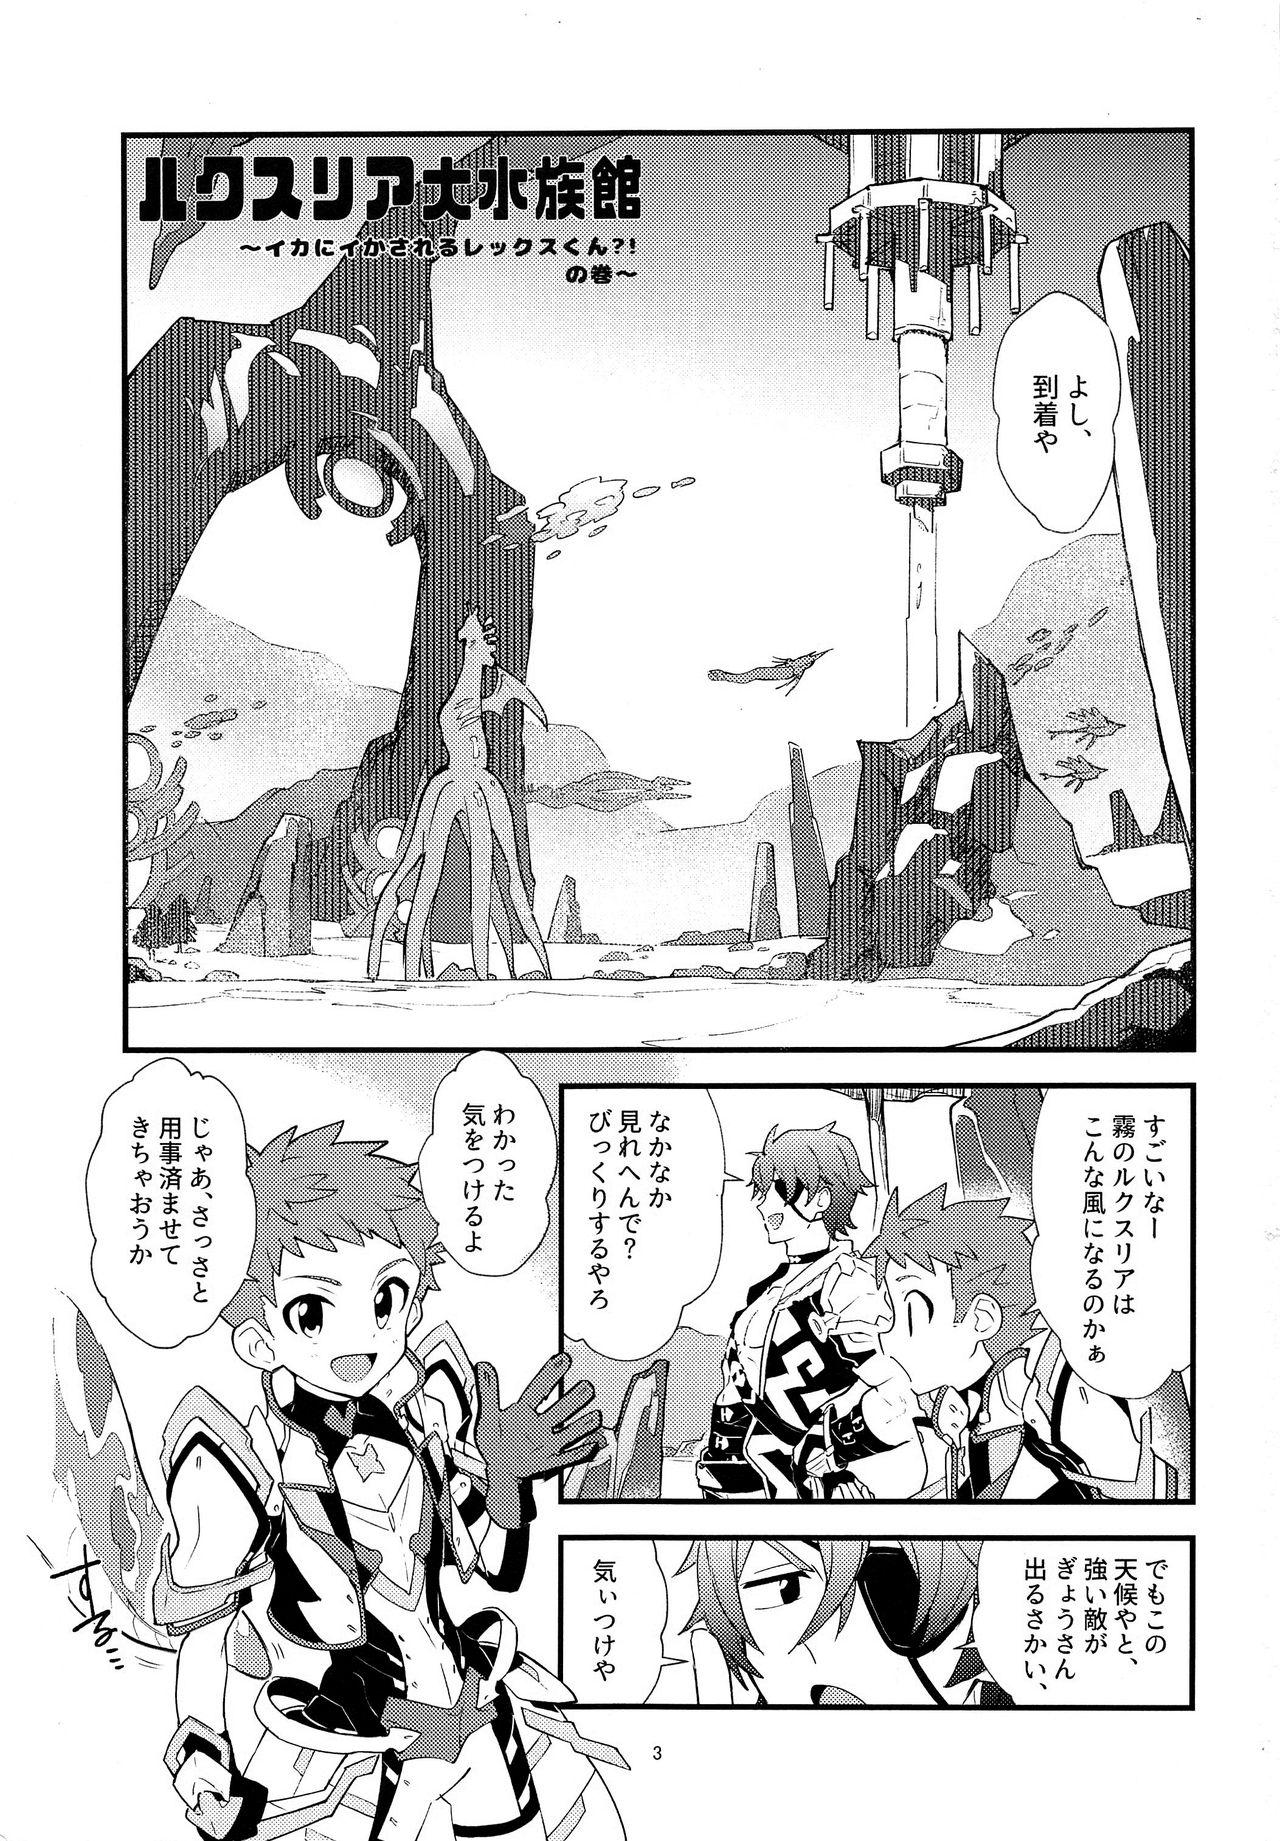 Gay Friend LUXURIUM - Xenoblade chronicles 2 Girlongirl - Page 2